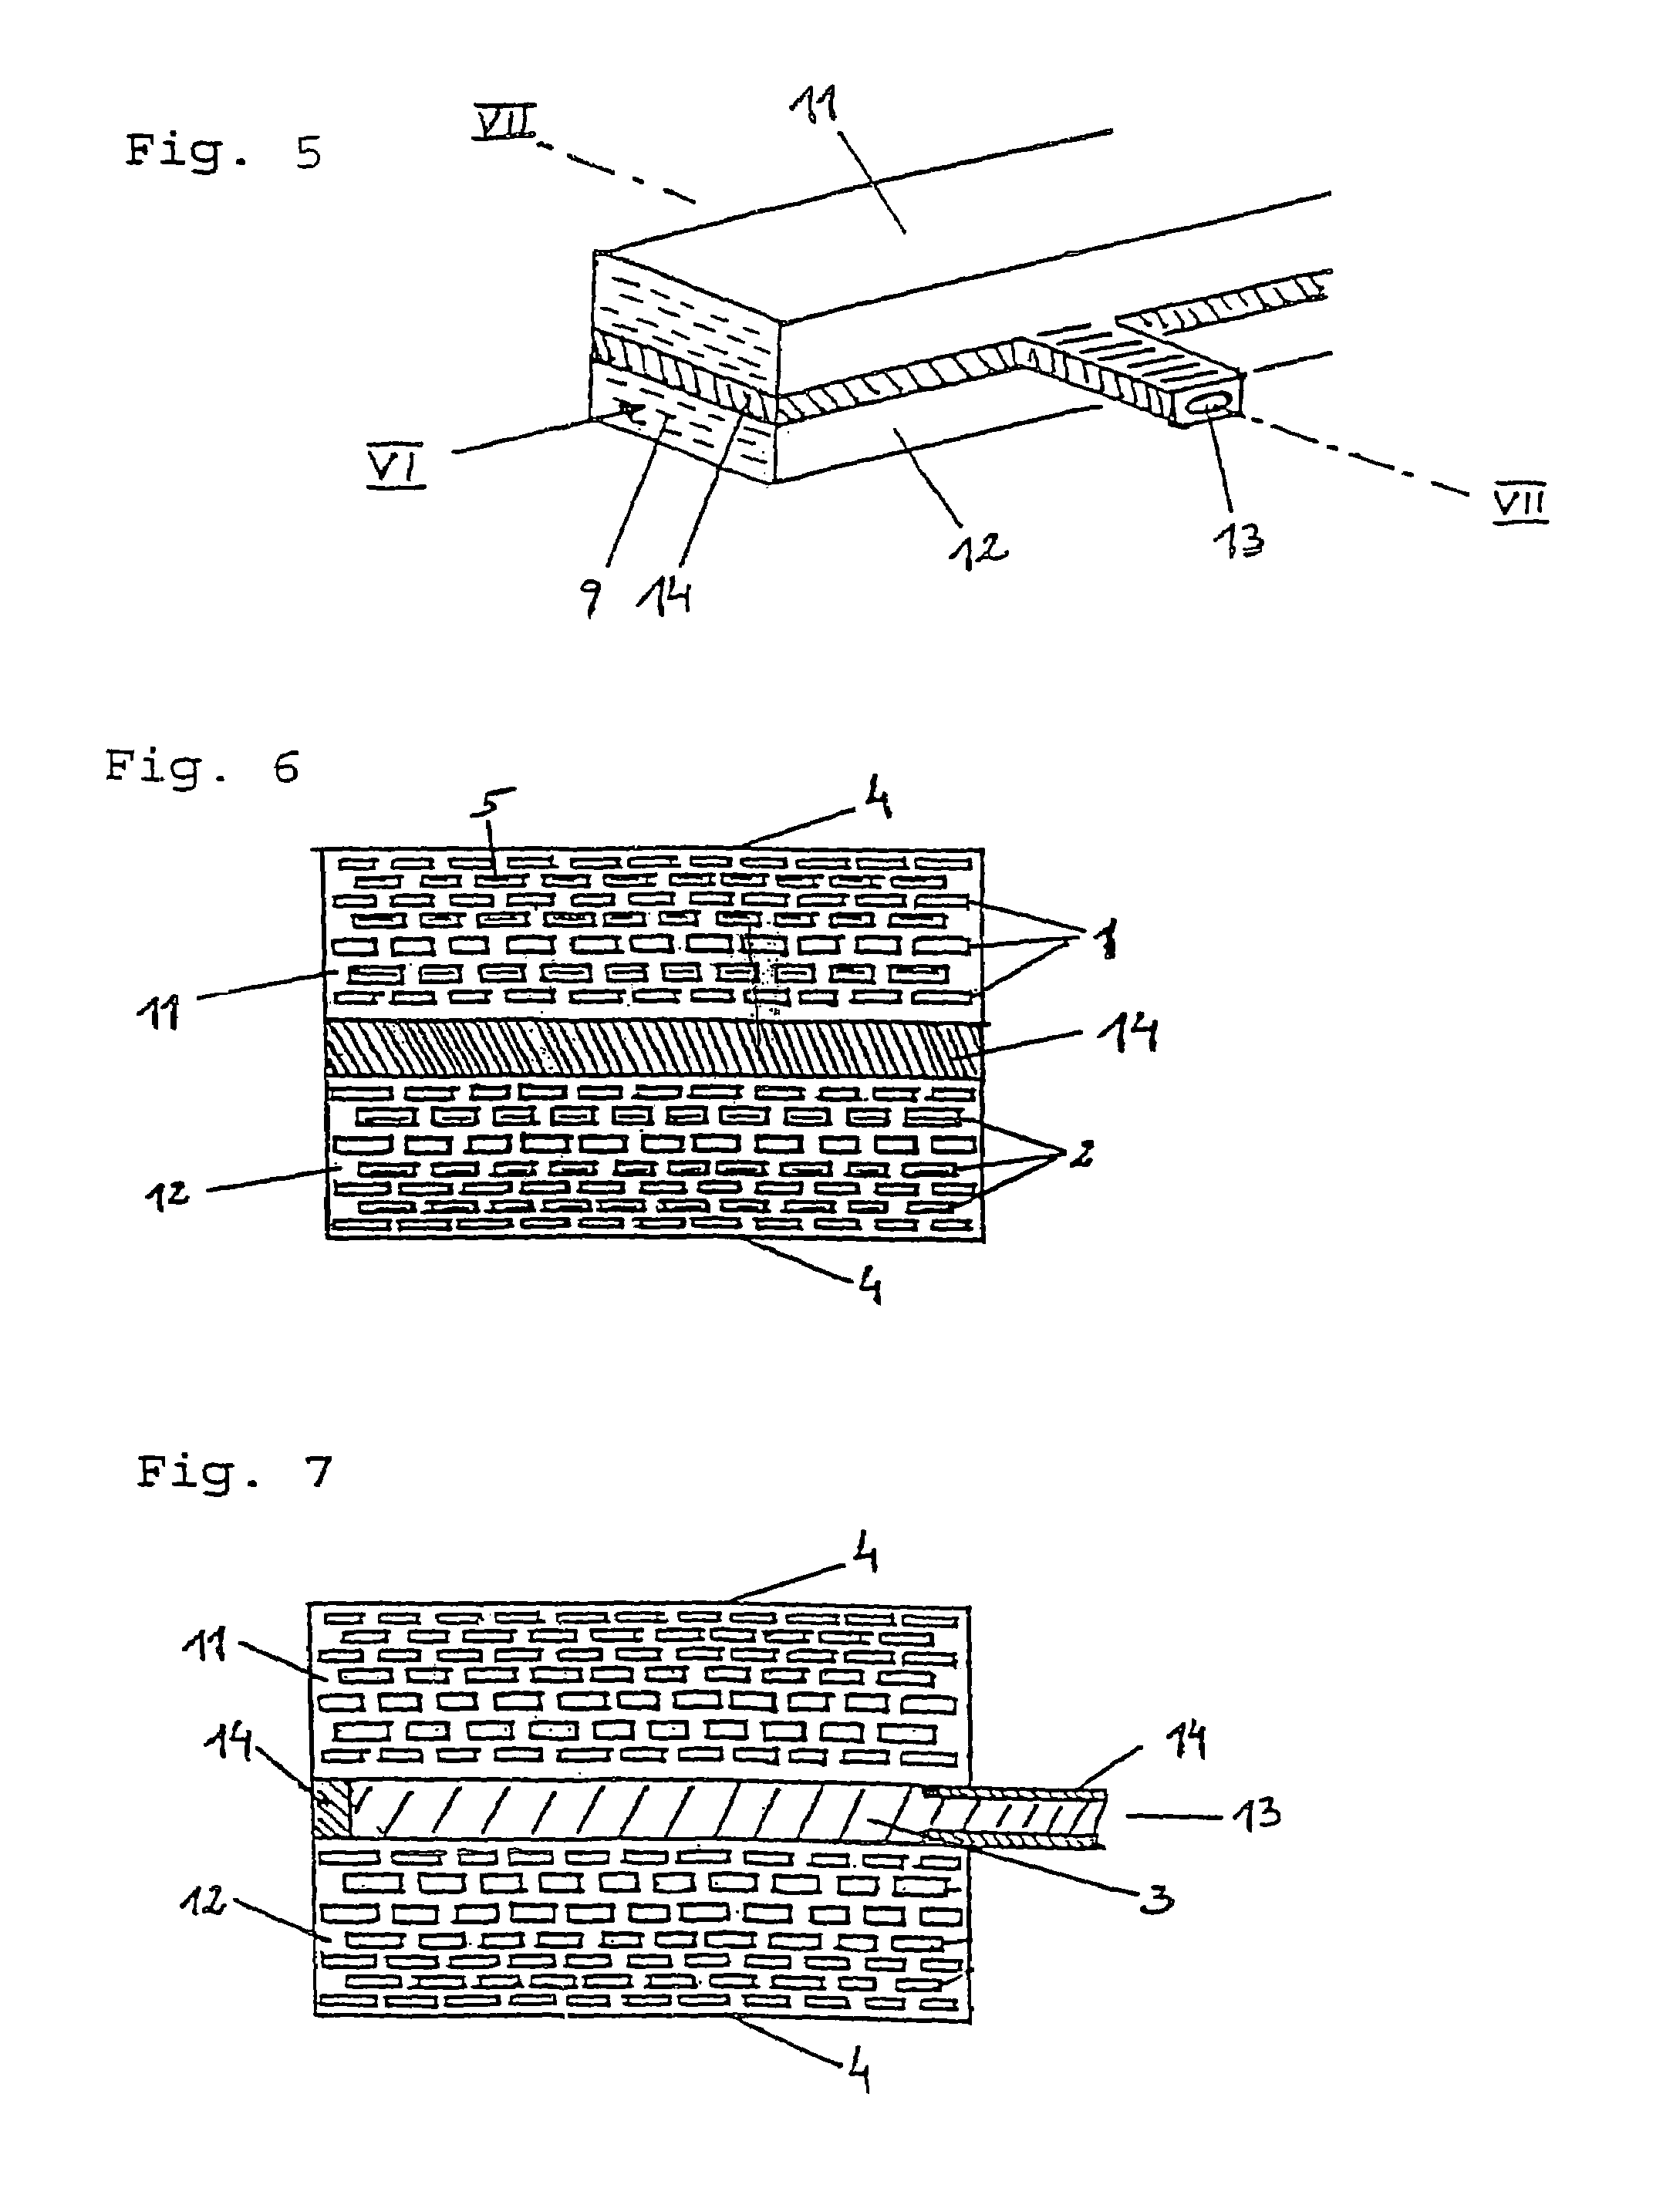 Filter system for spreading soot particles from a stream of exhaust gas